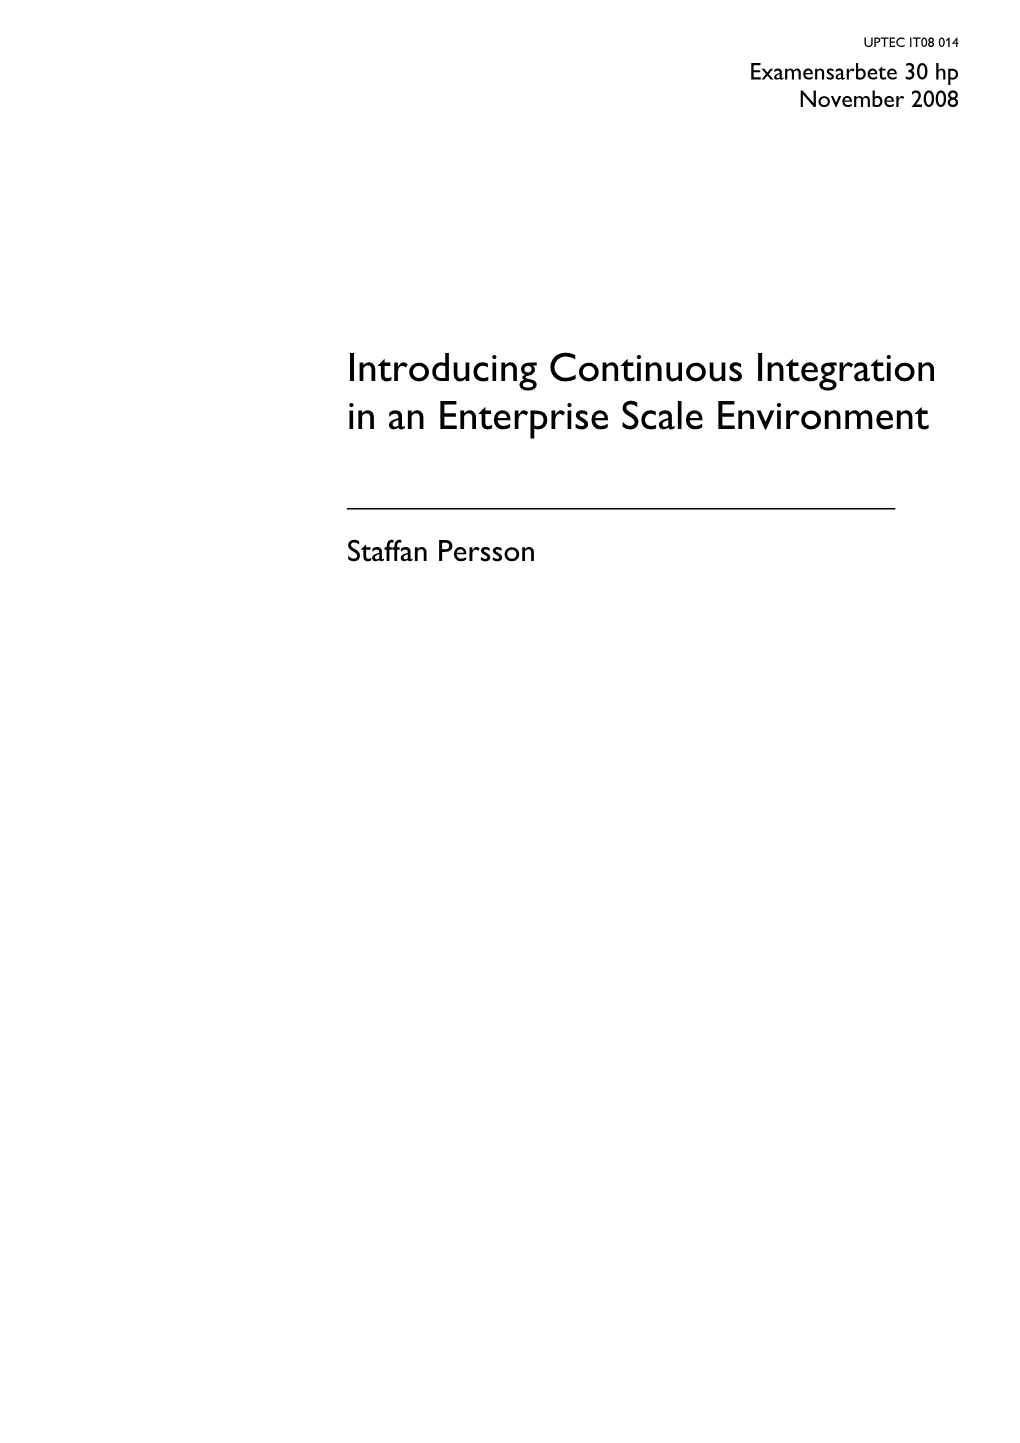 Introducing Continuous Integration in an Enterprise Scale Environment